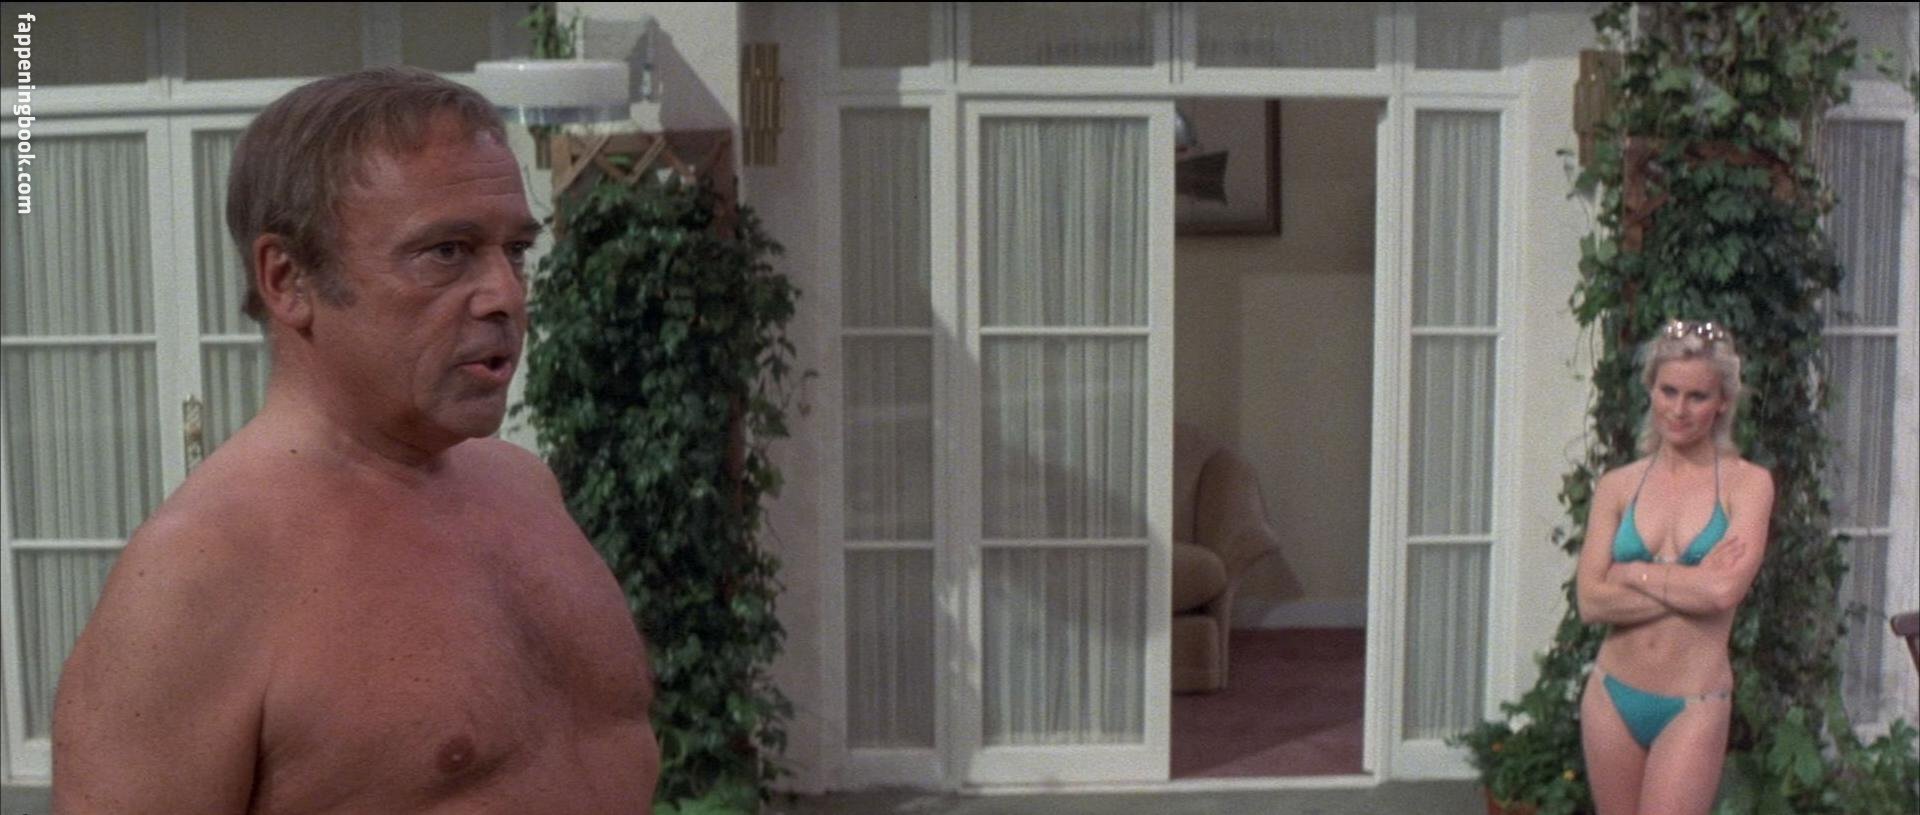 Denise Crosby Nude, The Fappening - Photo #145841 - FappeningBook.